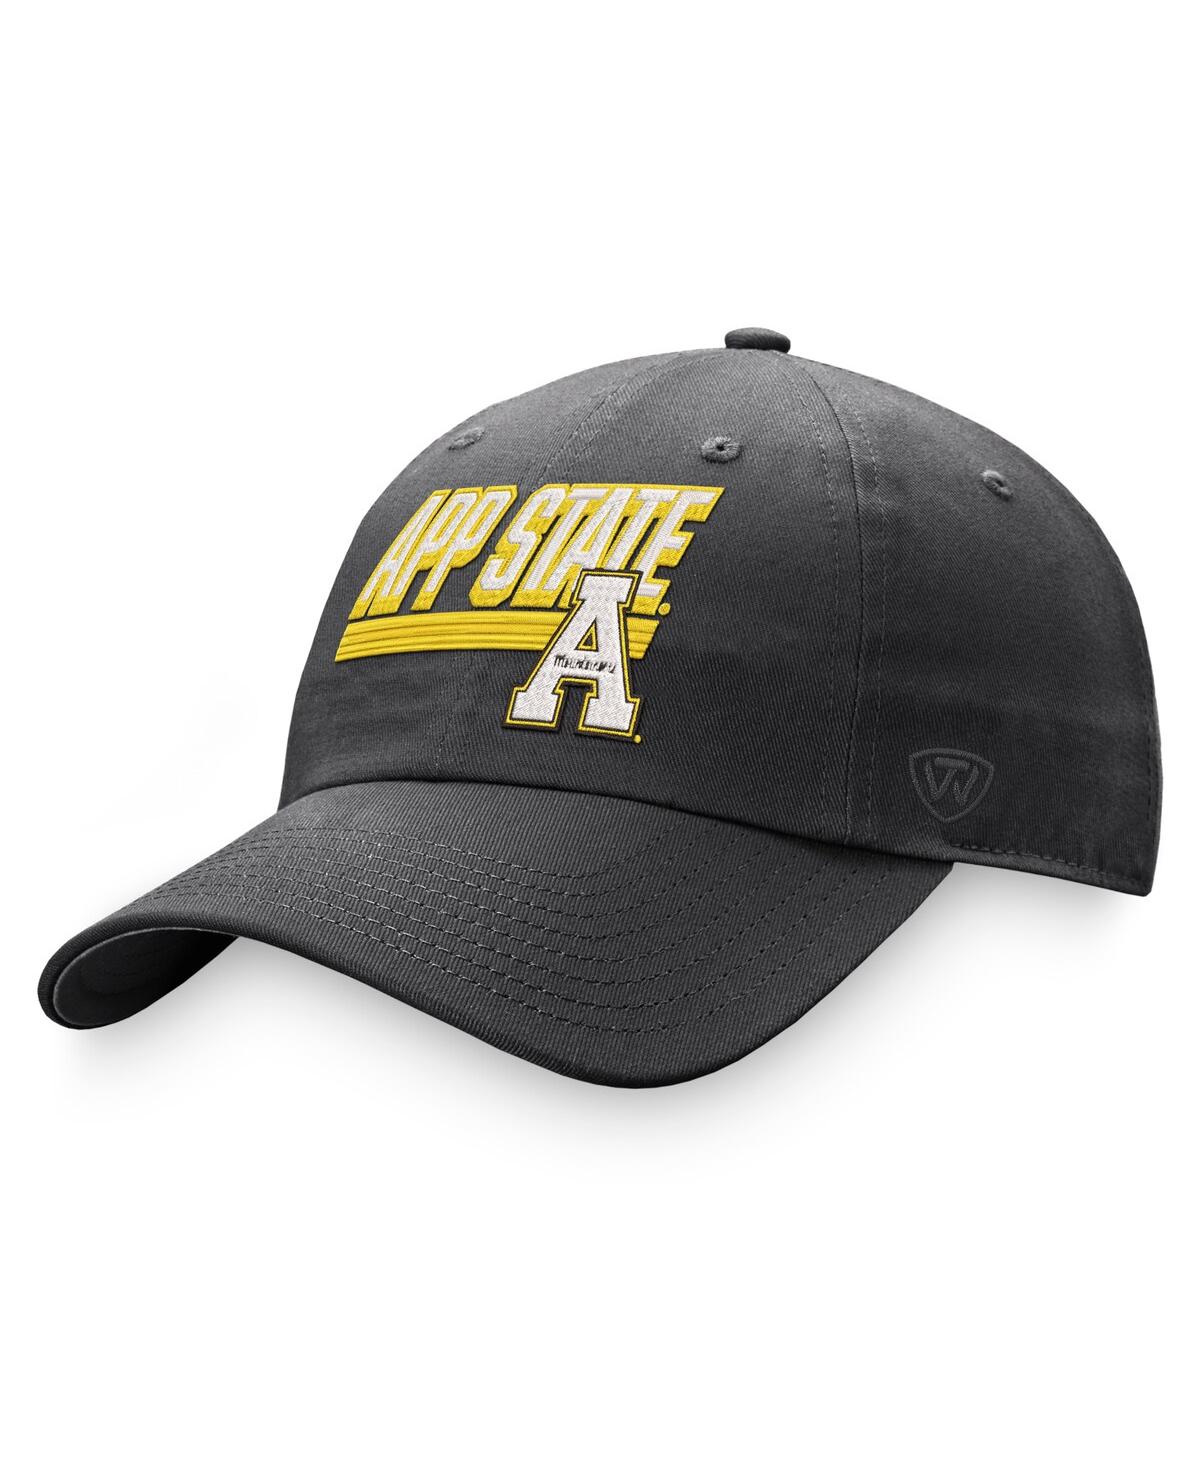 Shop Top Of The World Men's  Charcoal Appalachian State Mountaineers Slice Adjustable Hat